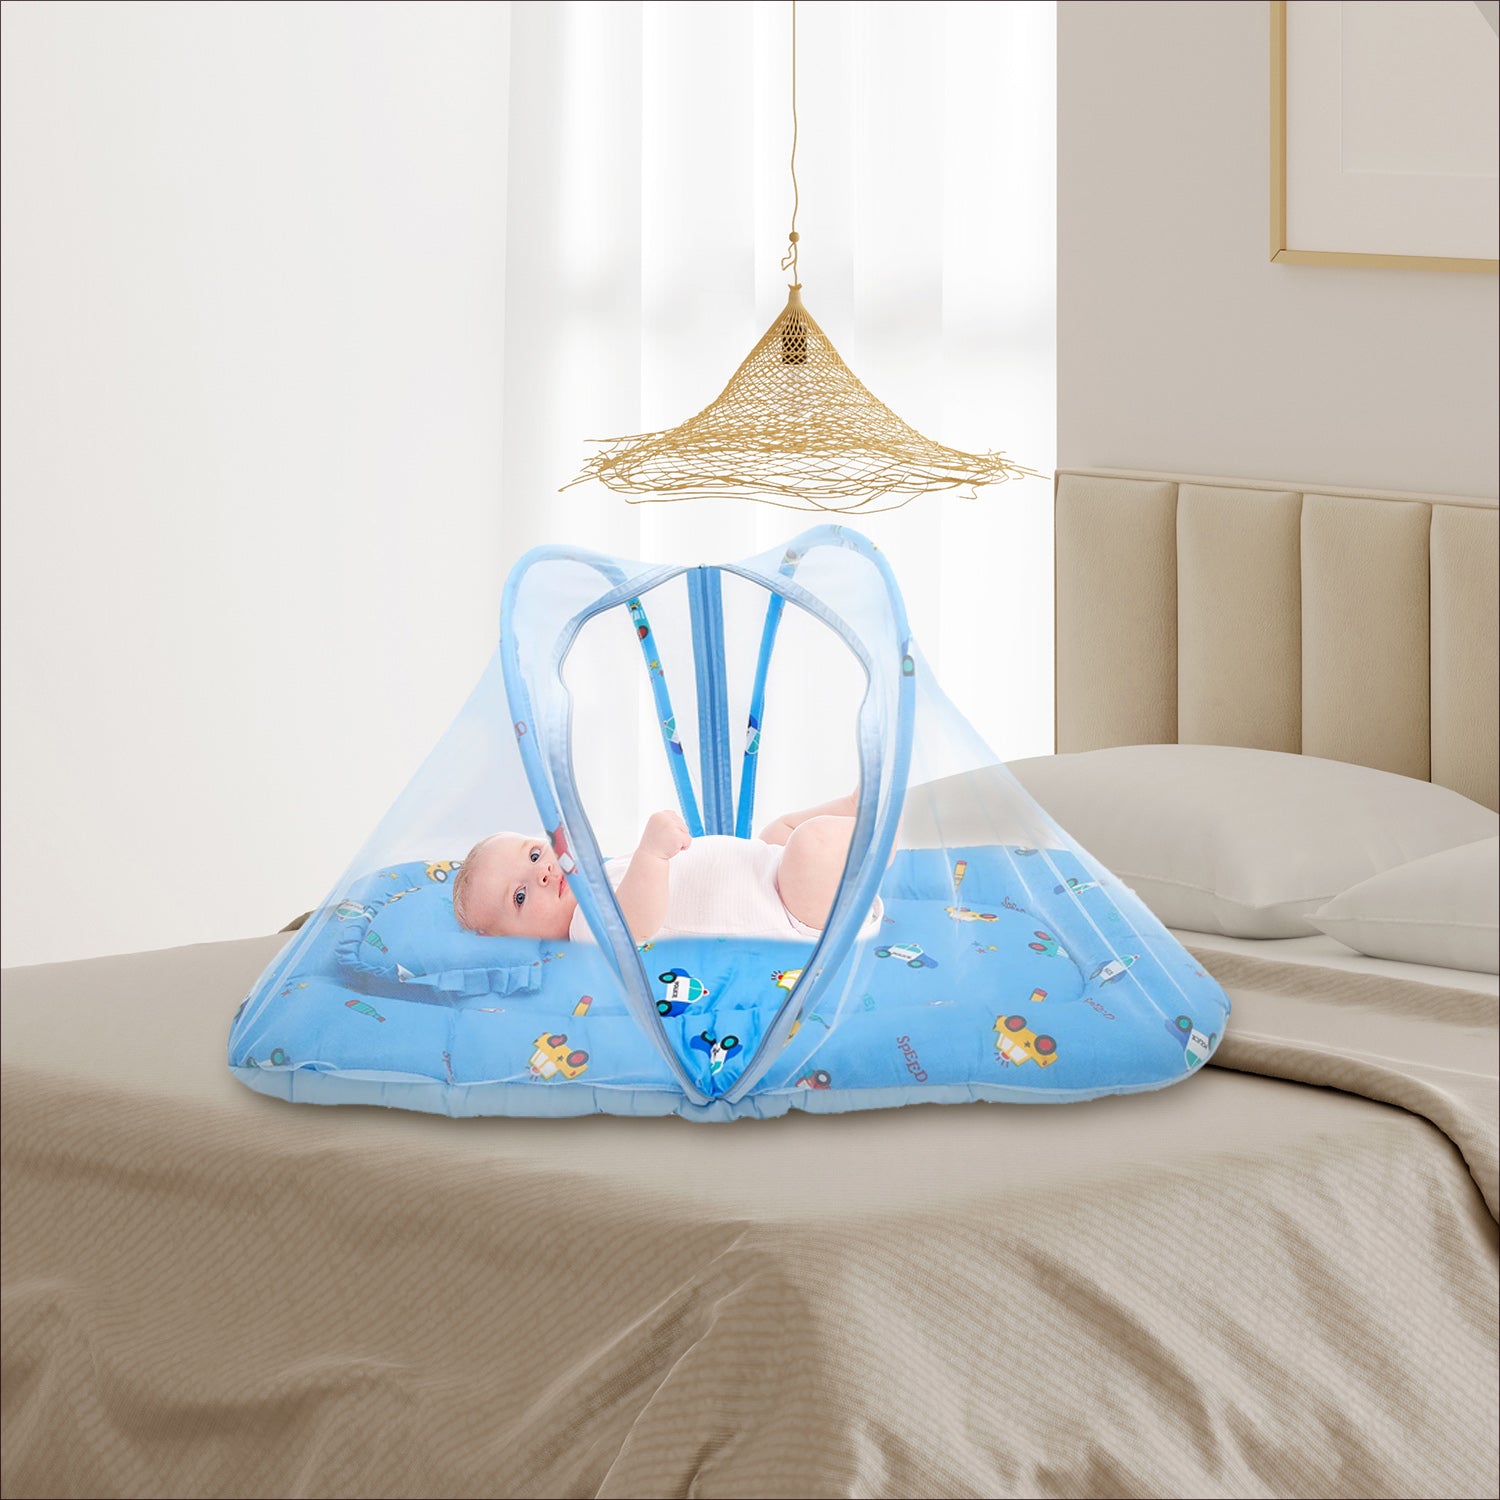 Mosquito Net Tent Mattress Set With Neck Pillow Catch Me If You Can Blue